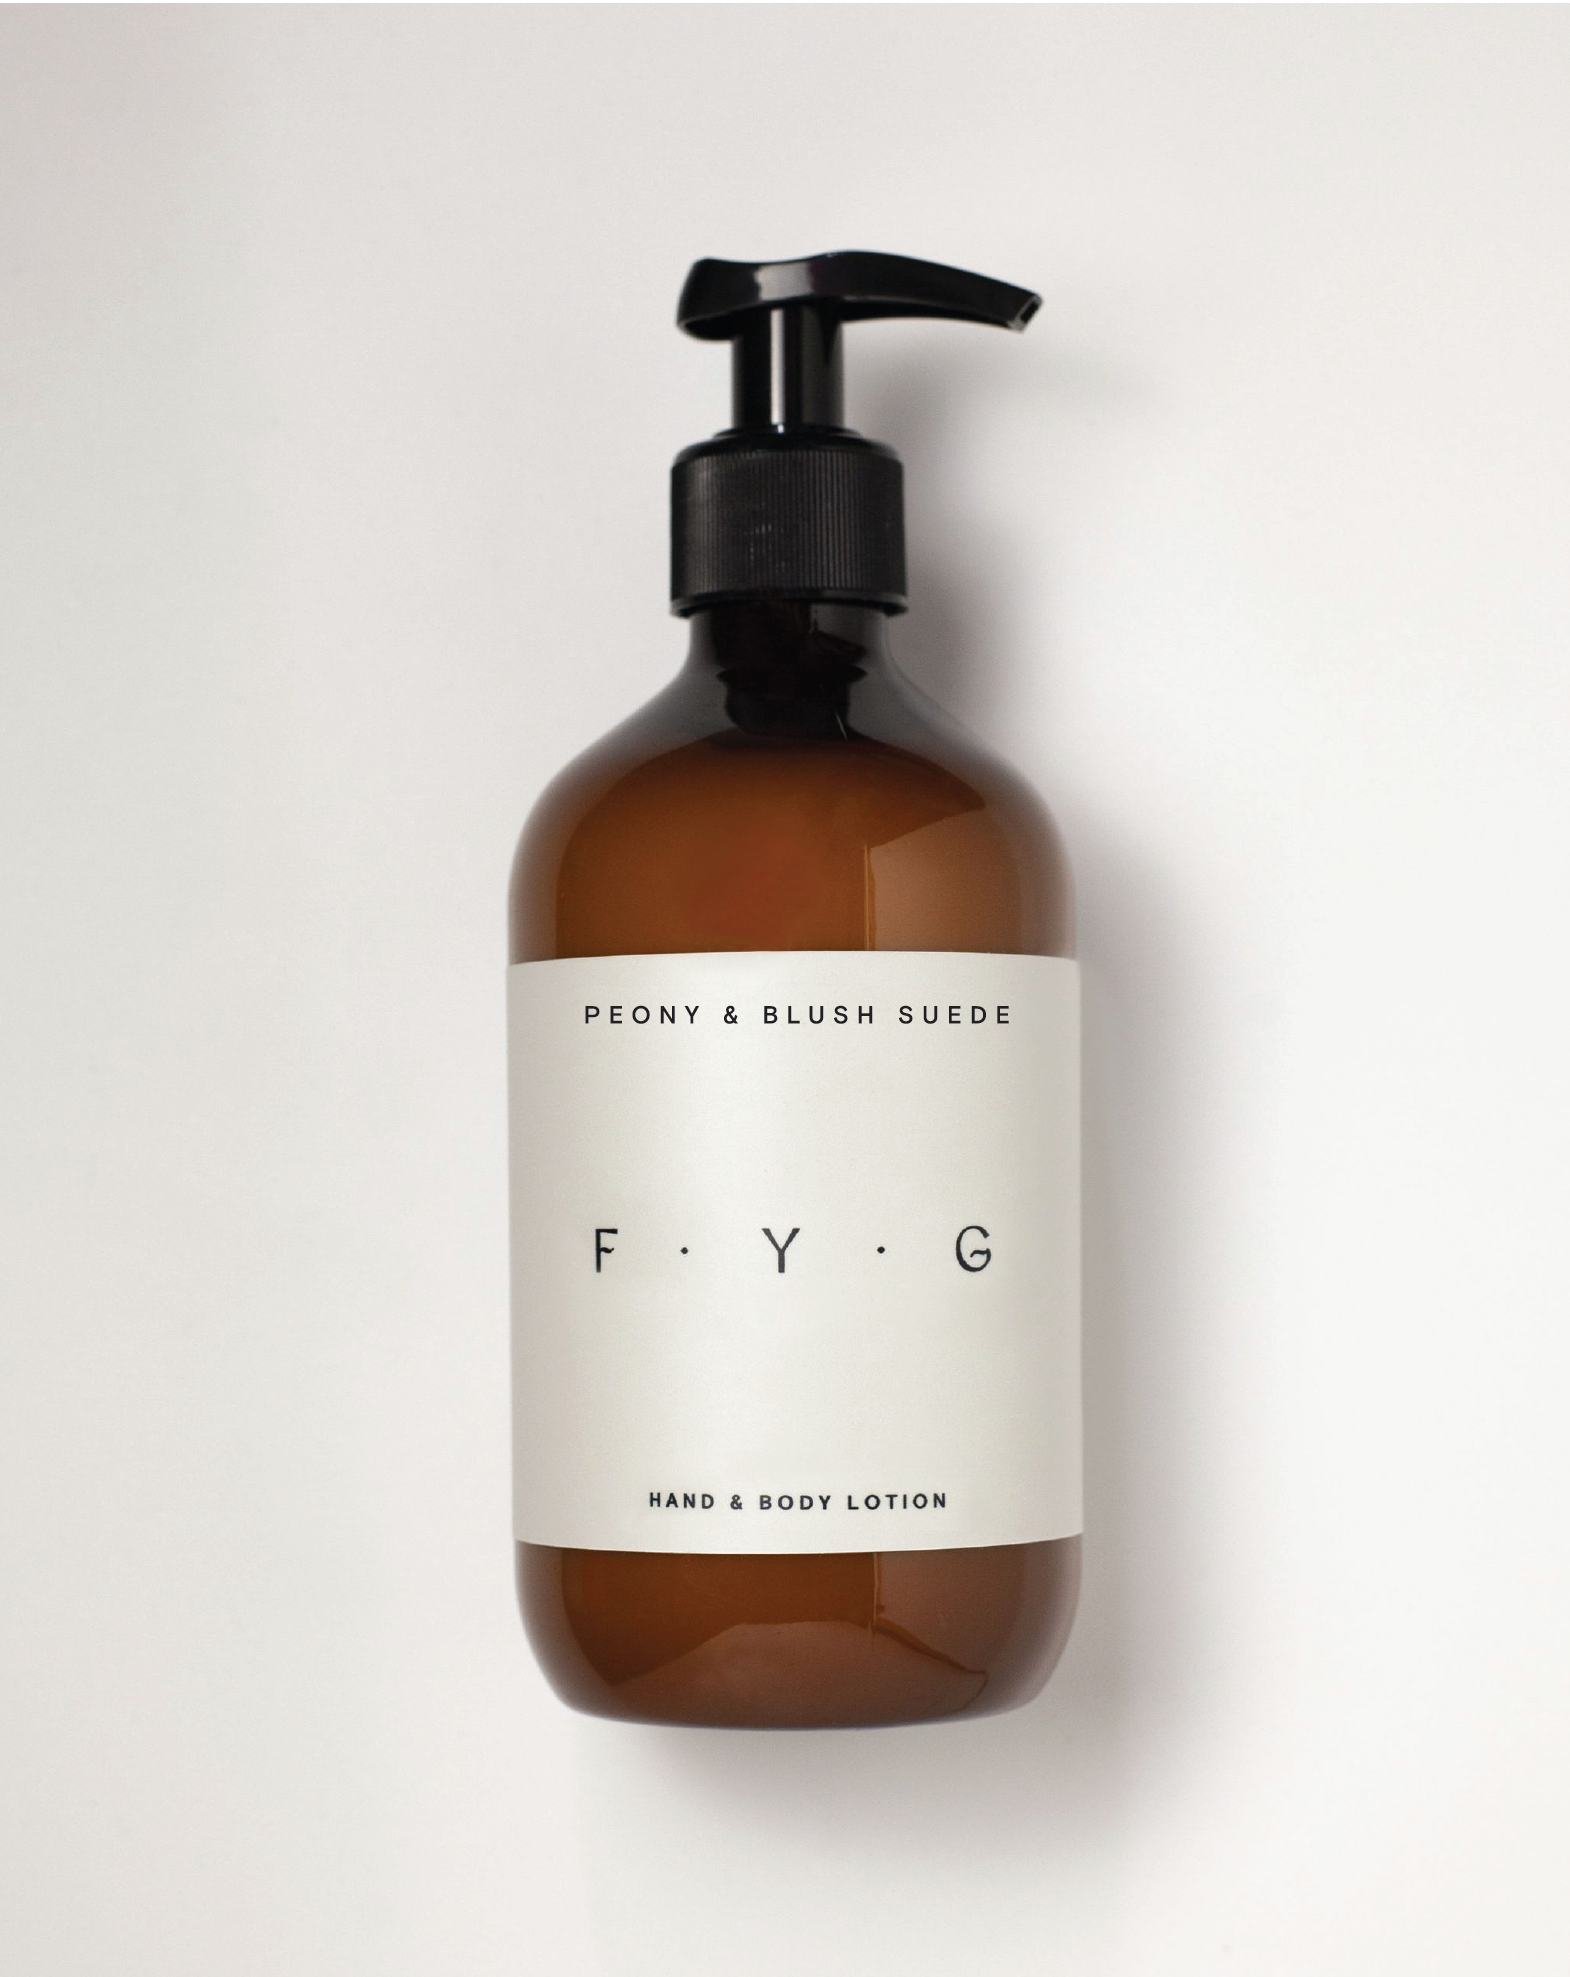 Find Your Glow Peony & Blush Suede Hand & Body Lotion